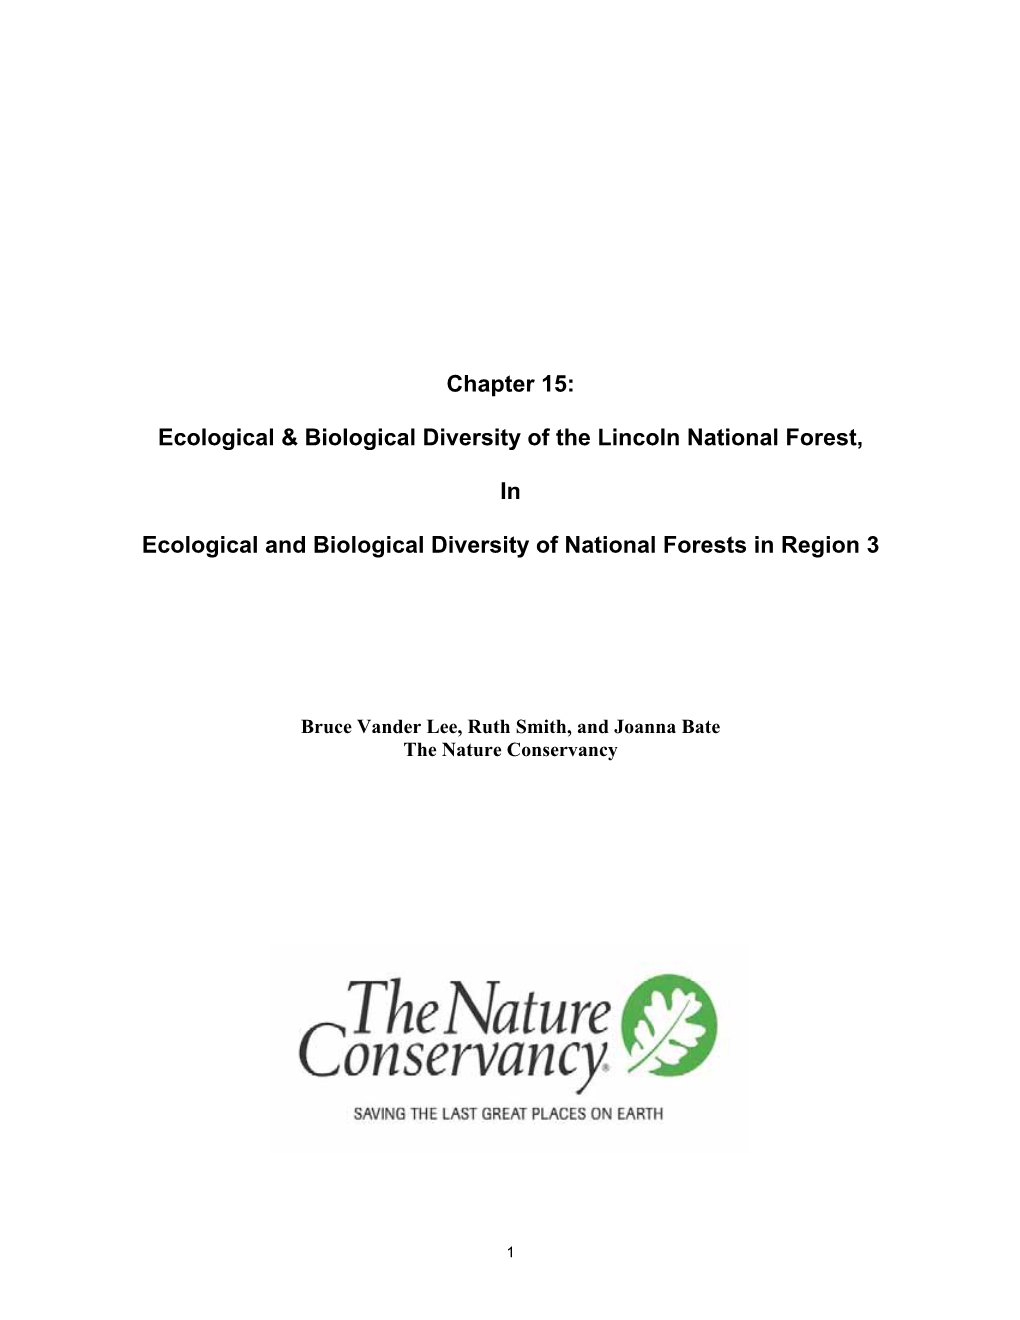 Chapter 15: Ecological and Biological Diversity of the Lincoln National Forest